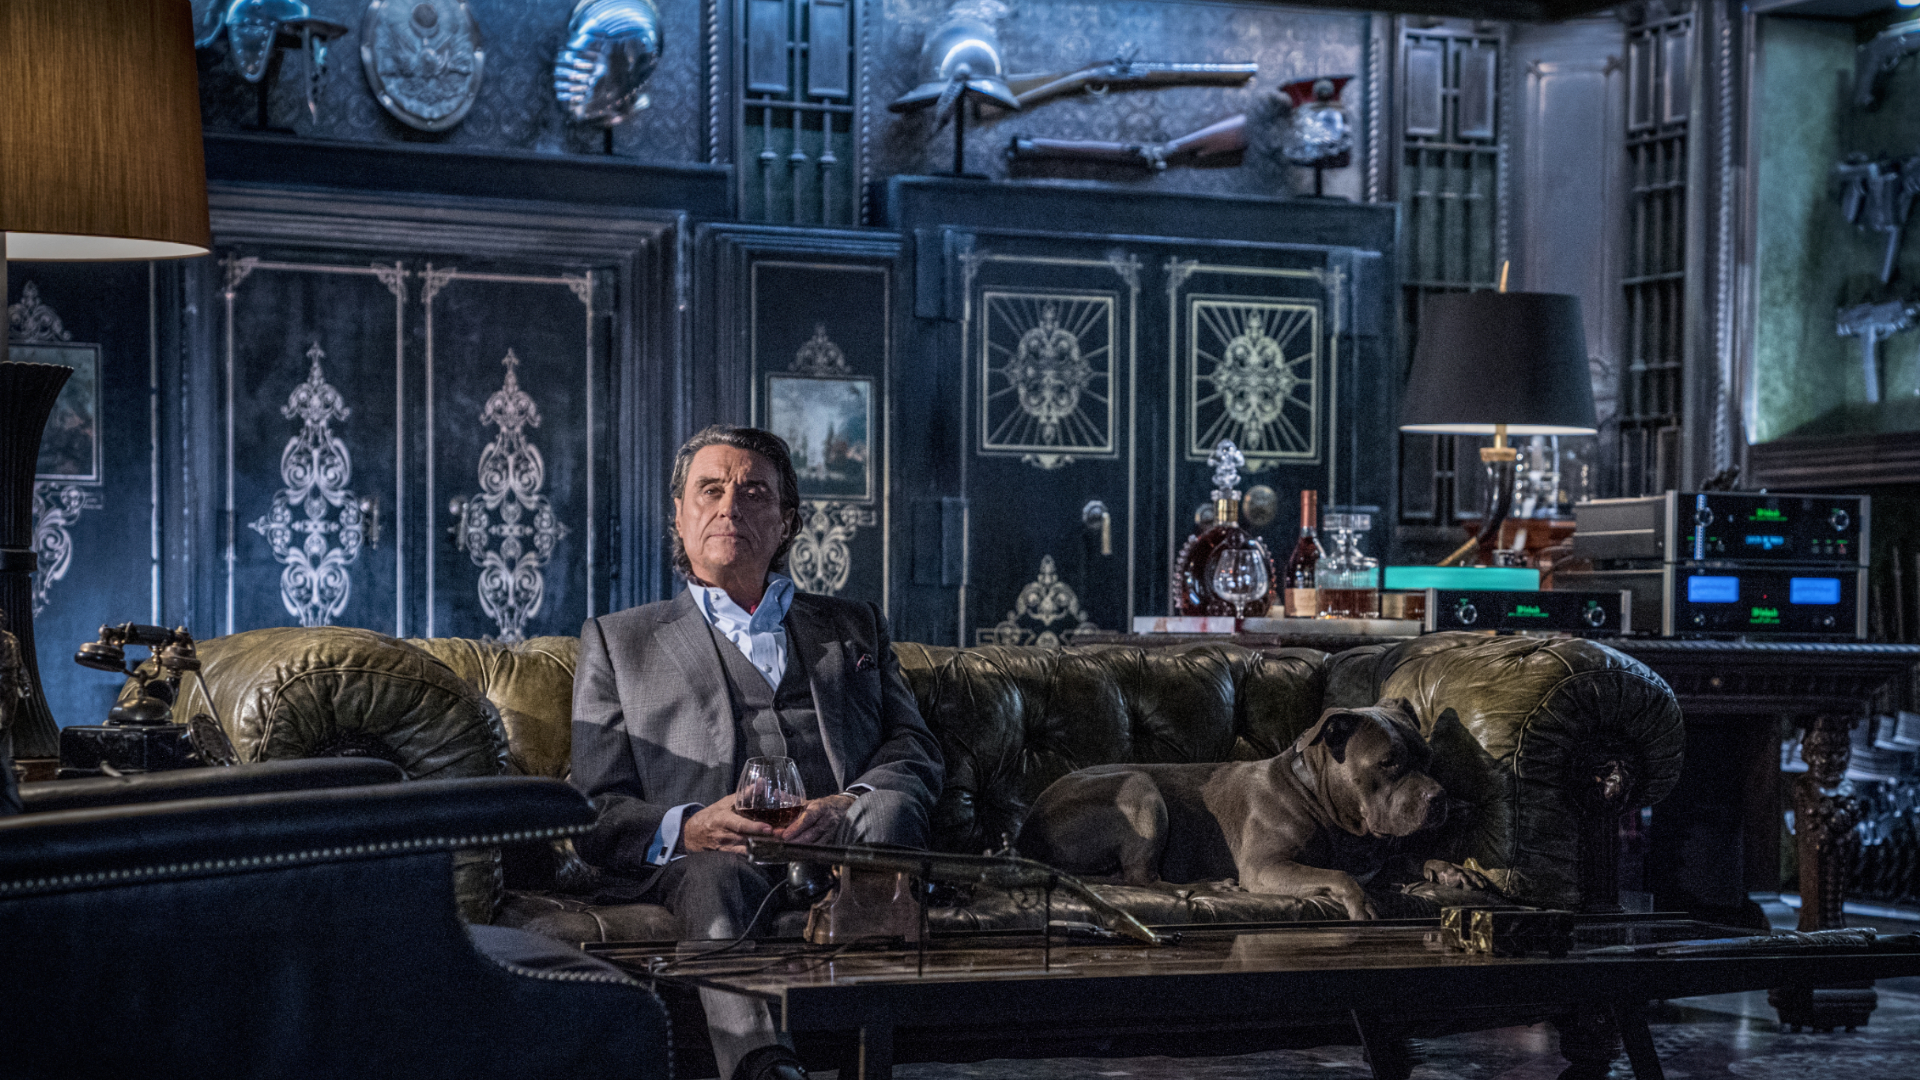 Winston smiles at someone off-camera while sitting on a fancy couch in the John Wick movie series